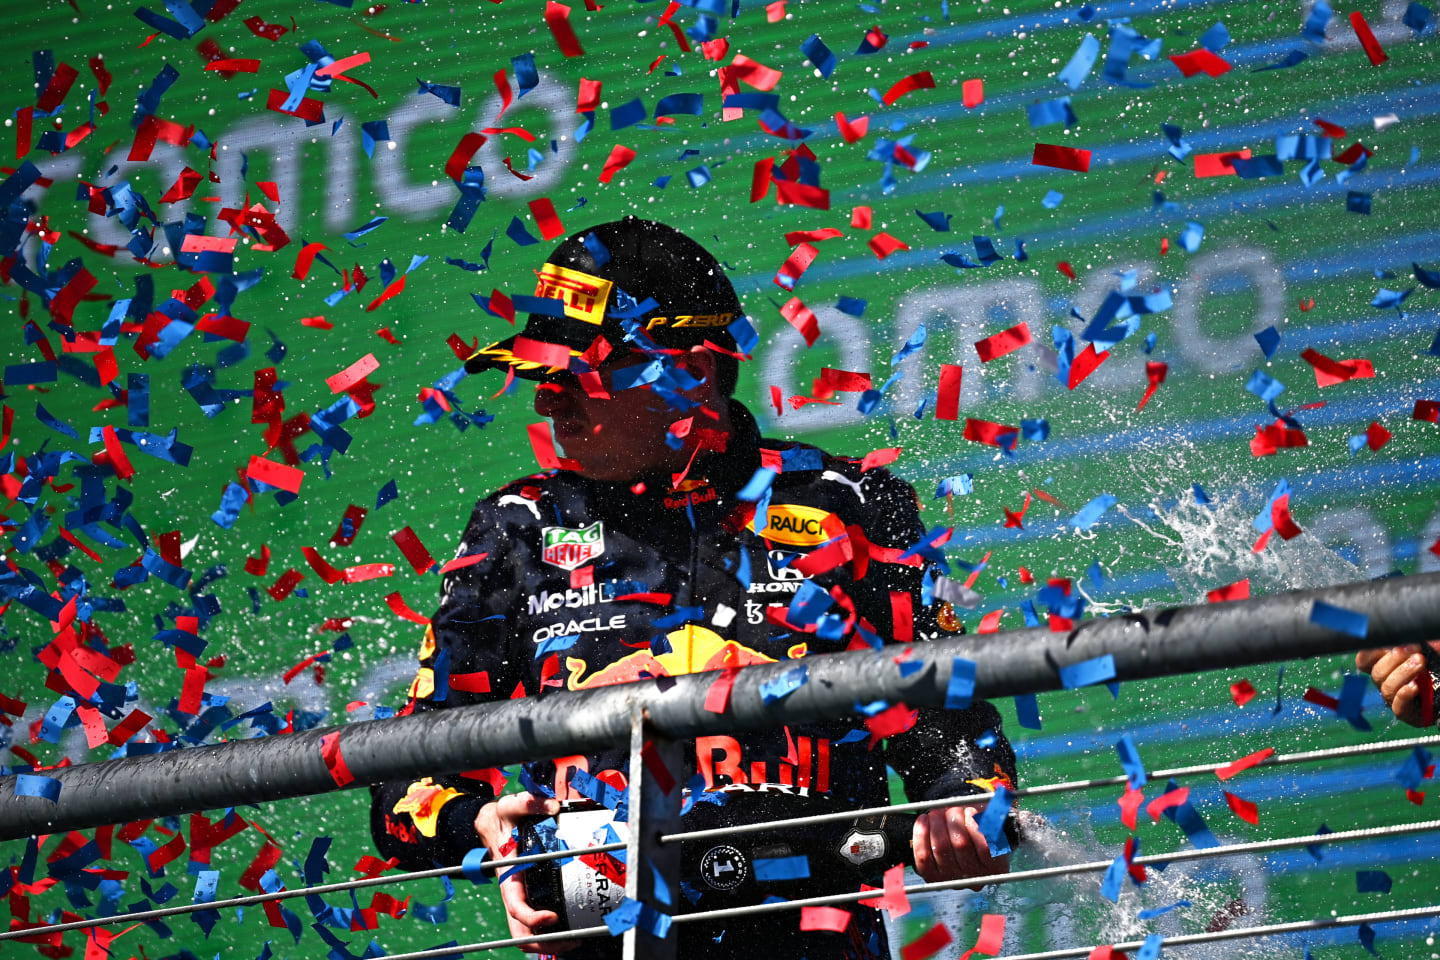 AUSTIN, TEXAS - OCTOBER 24: Race winner Max Verstappen of Netherlands and Red Bull Racing celebrates on the podium during the F1 Grand Prix of USA at Circuit of The Americas on October 24, 2021 in Austin, Texas. (Photo by Clive Mason - Formula 1/Formula 1 via Getty Images)